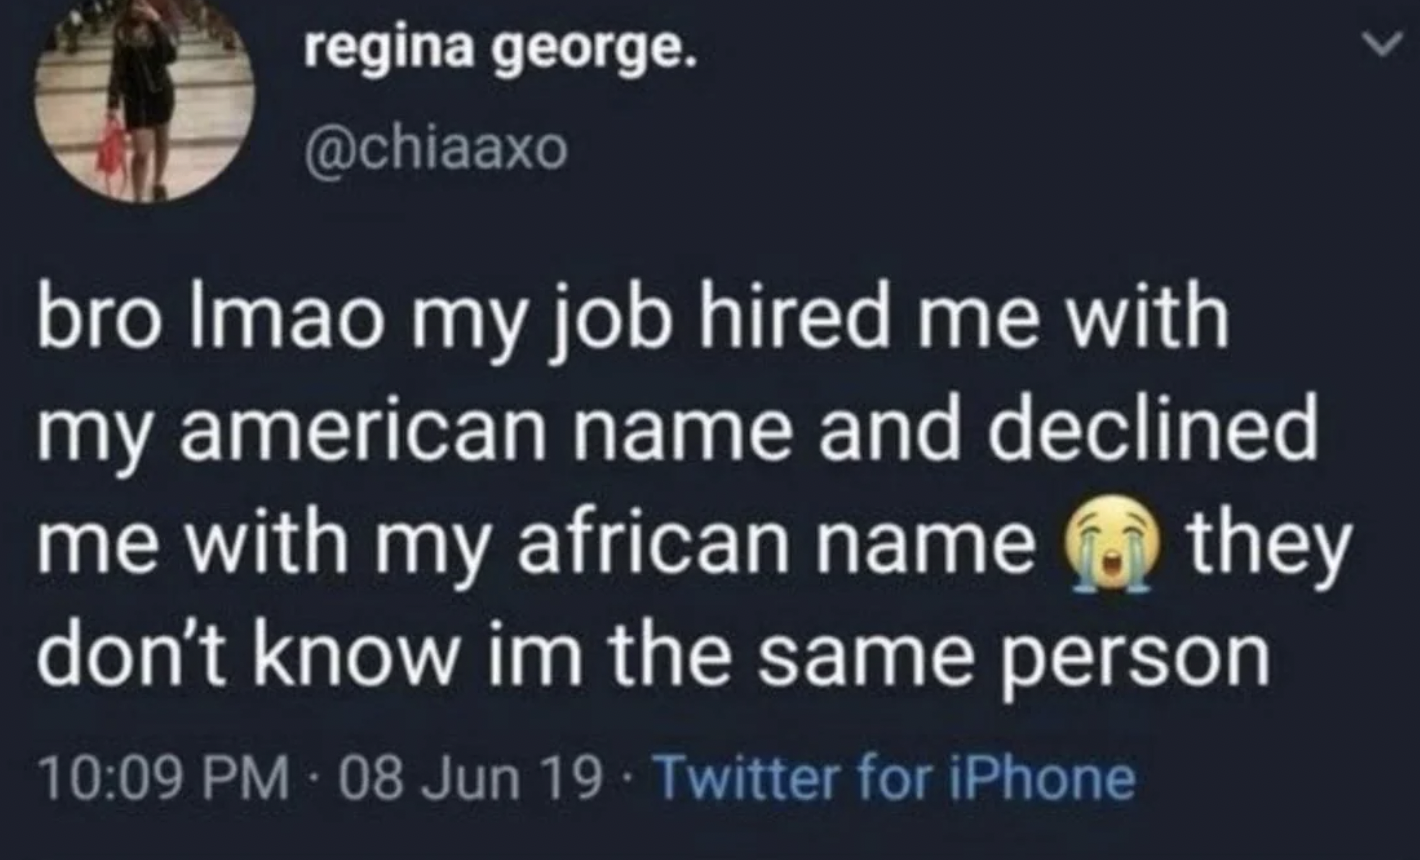 screenshot - regina george. bro Imao my job hired me with my american name and declined me with my african name they don't know im the same person 08 Jun 19 Twitter for iPhone L